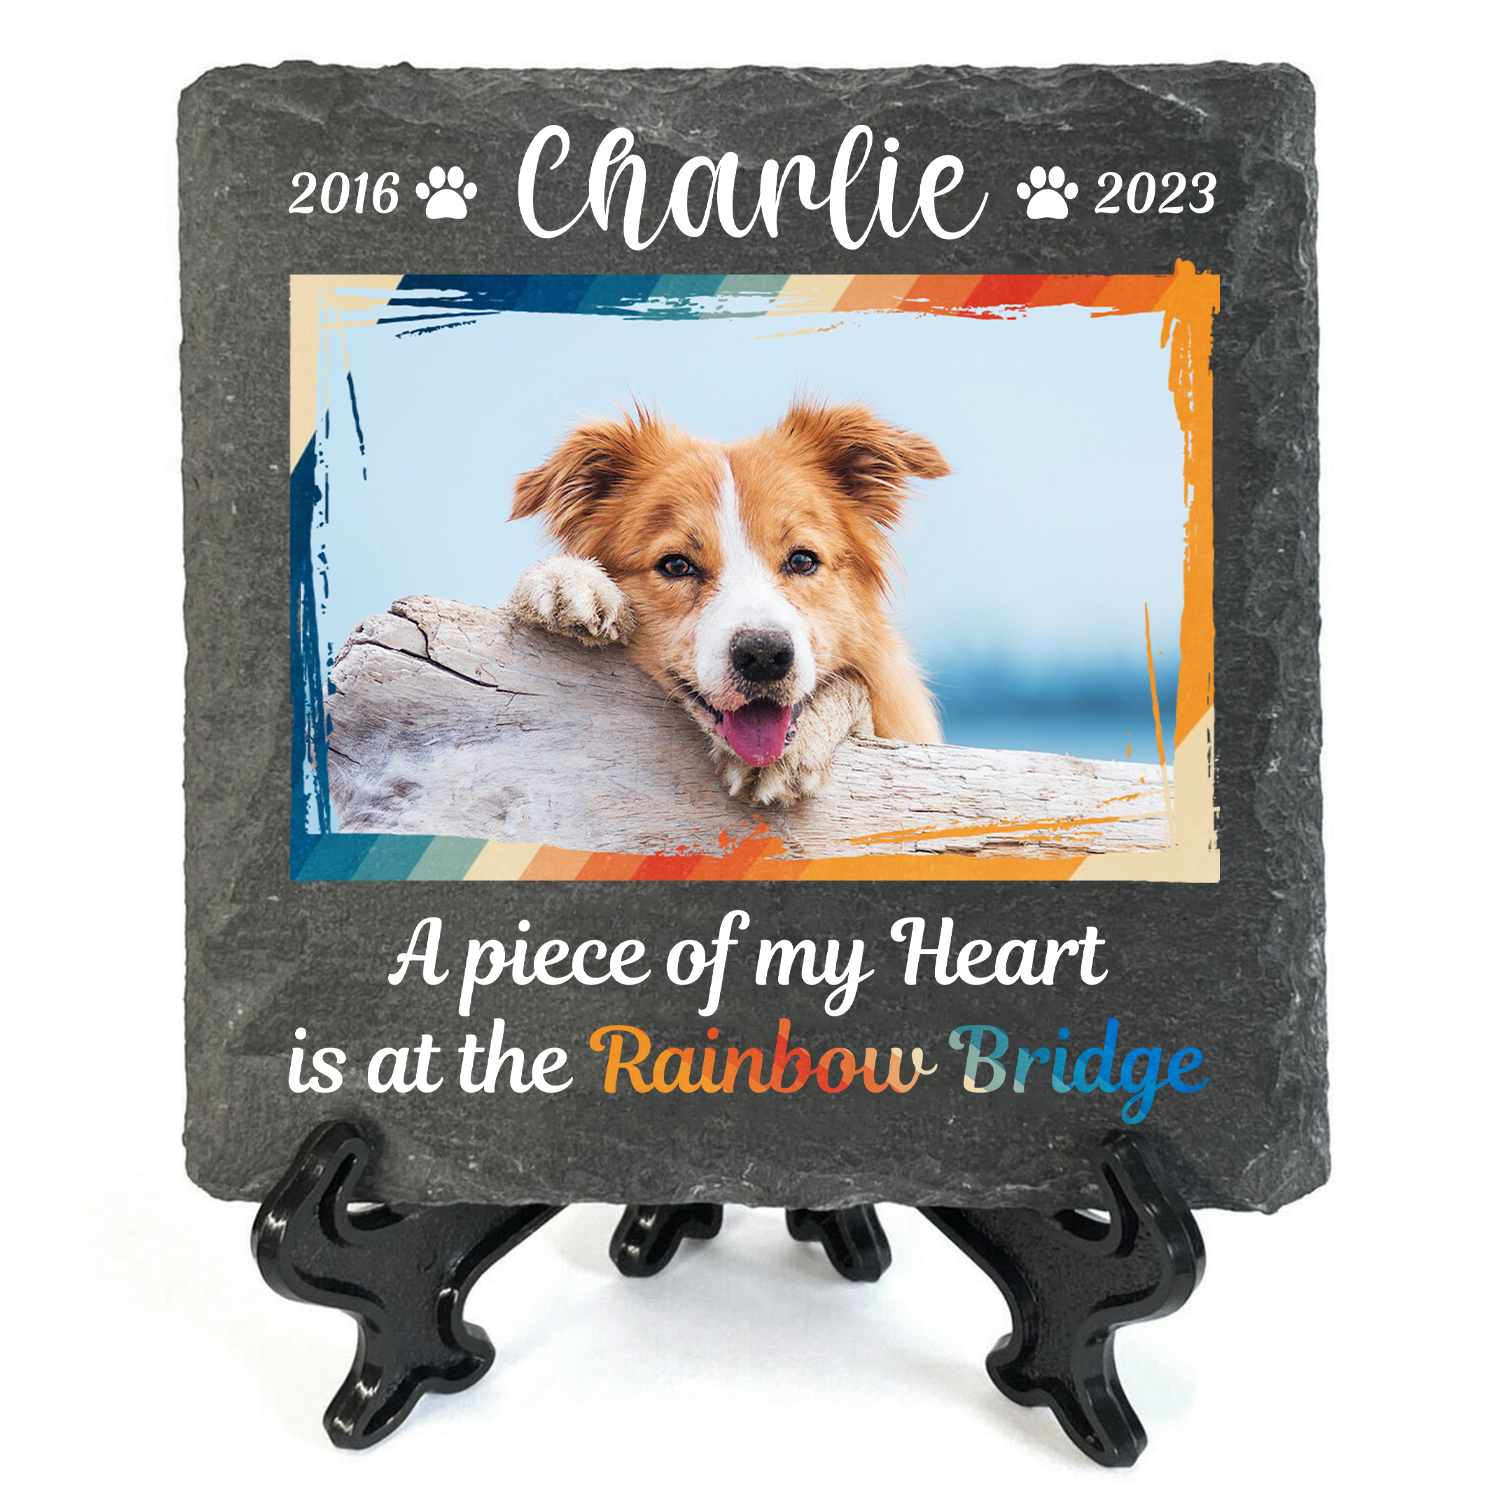 Vintage Frame Pet Photo A Piece Of My Heart Custom Dog Memorial Stone, Pet Memorial Gifts - Personalized Custom Memorial Tombstone